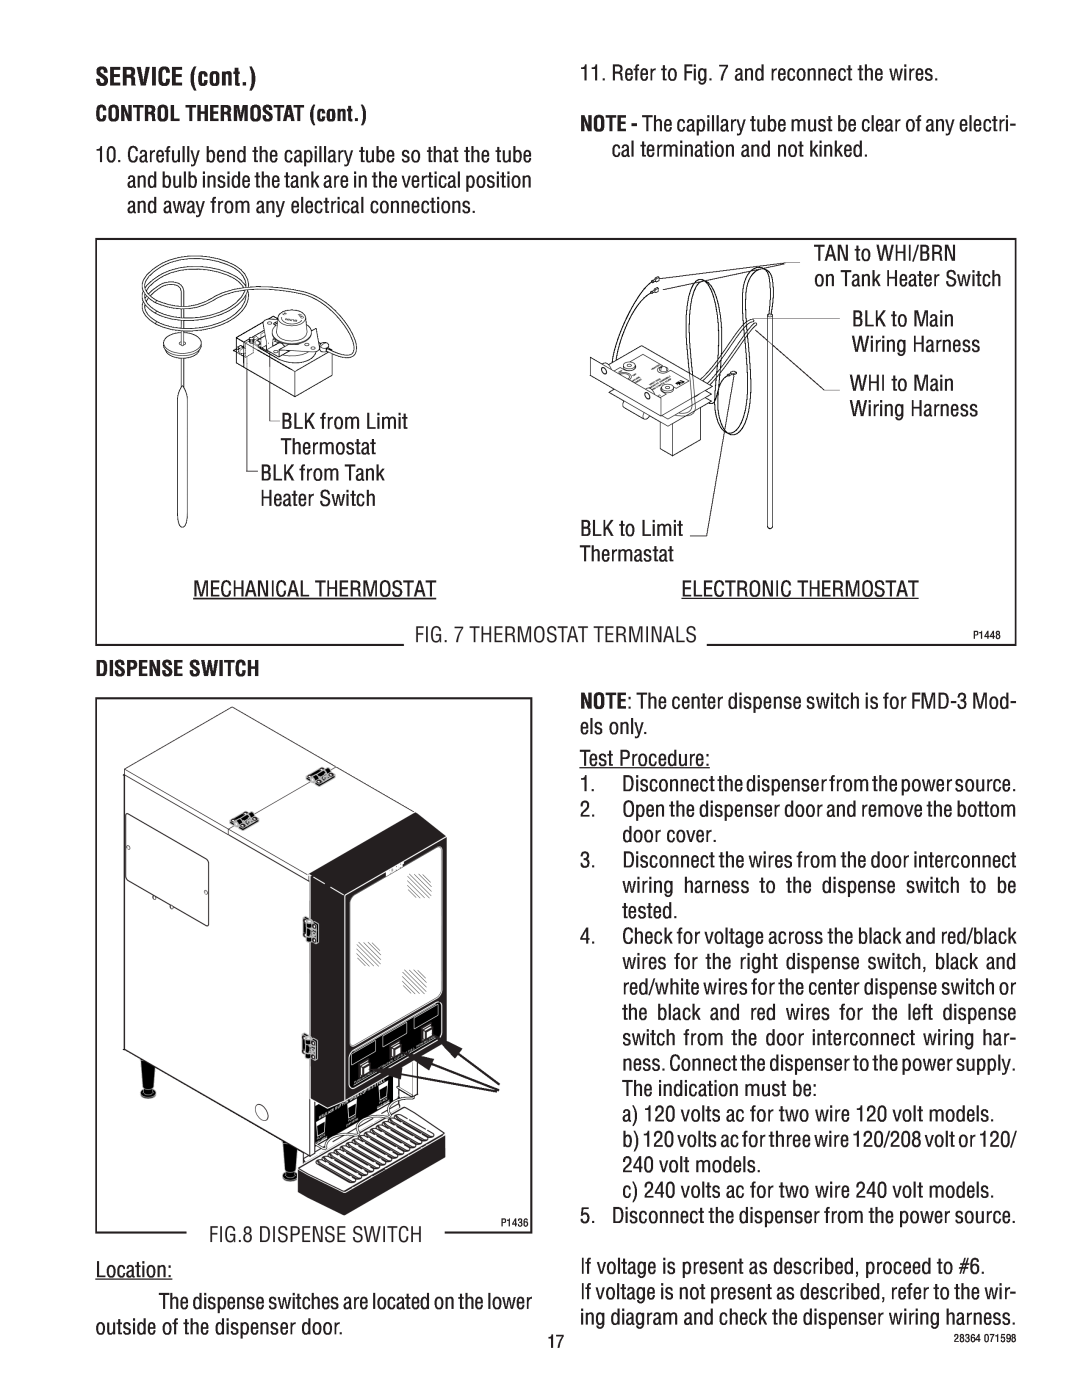 Bunn FMD-3 service manual CONTROL THERMOSTAT cont, Dispense Switch, Location, SERVICE cont 